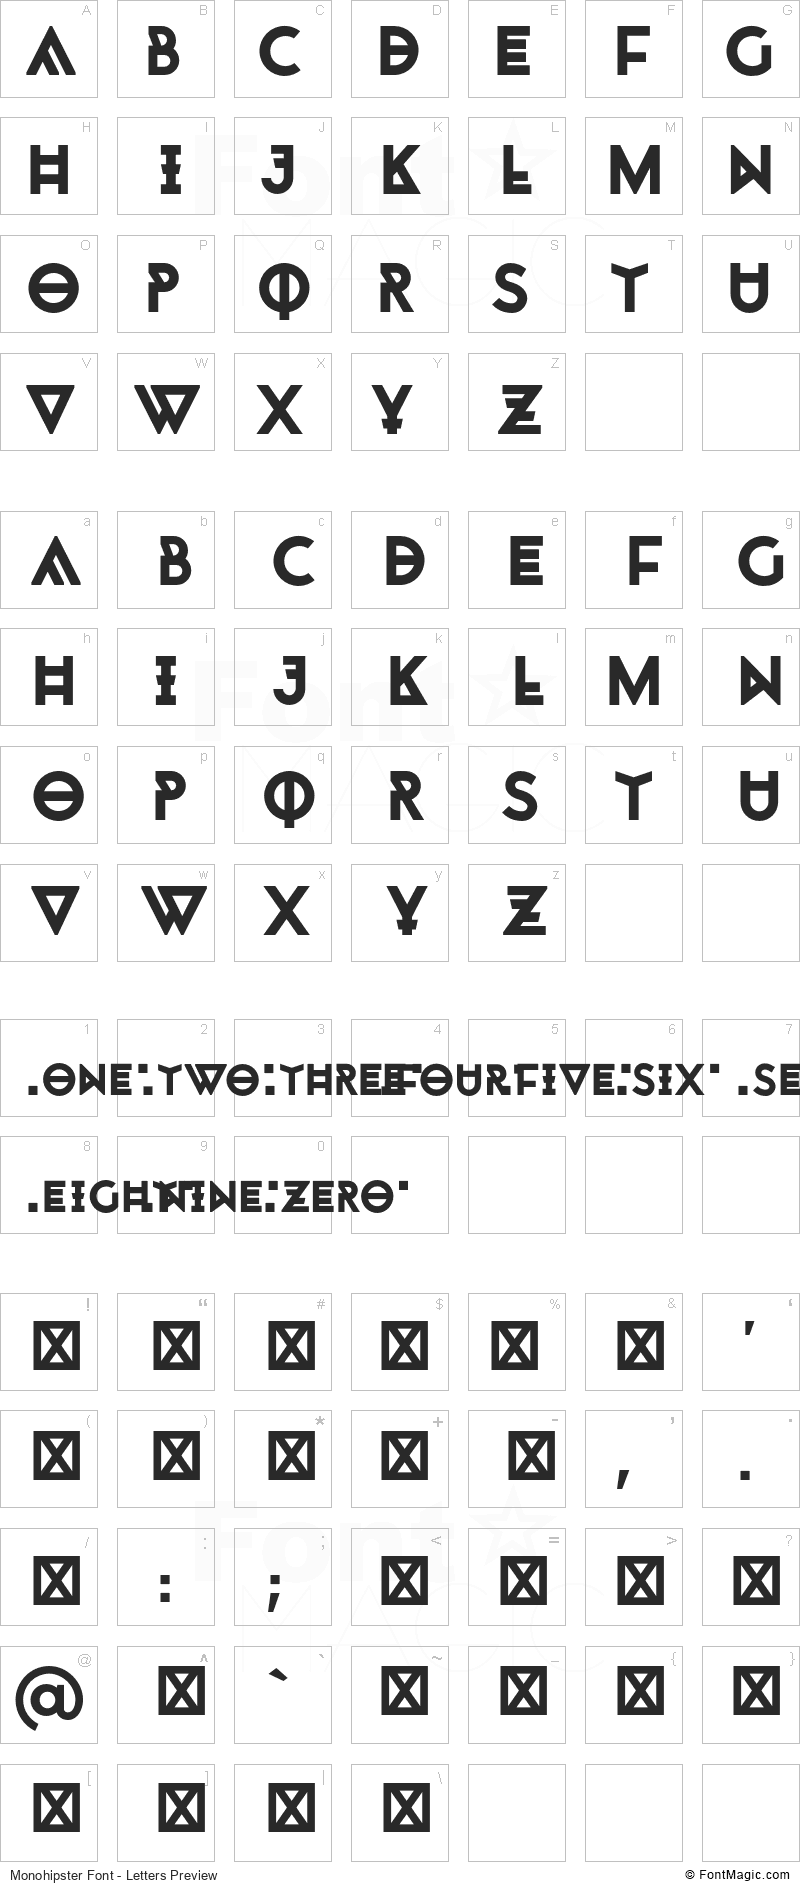 Monohipster Font - All Latters Preview Chart